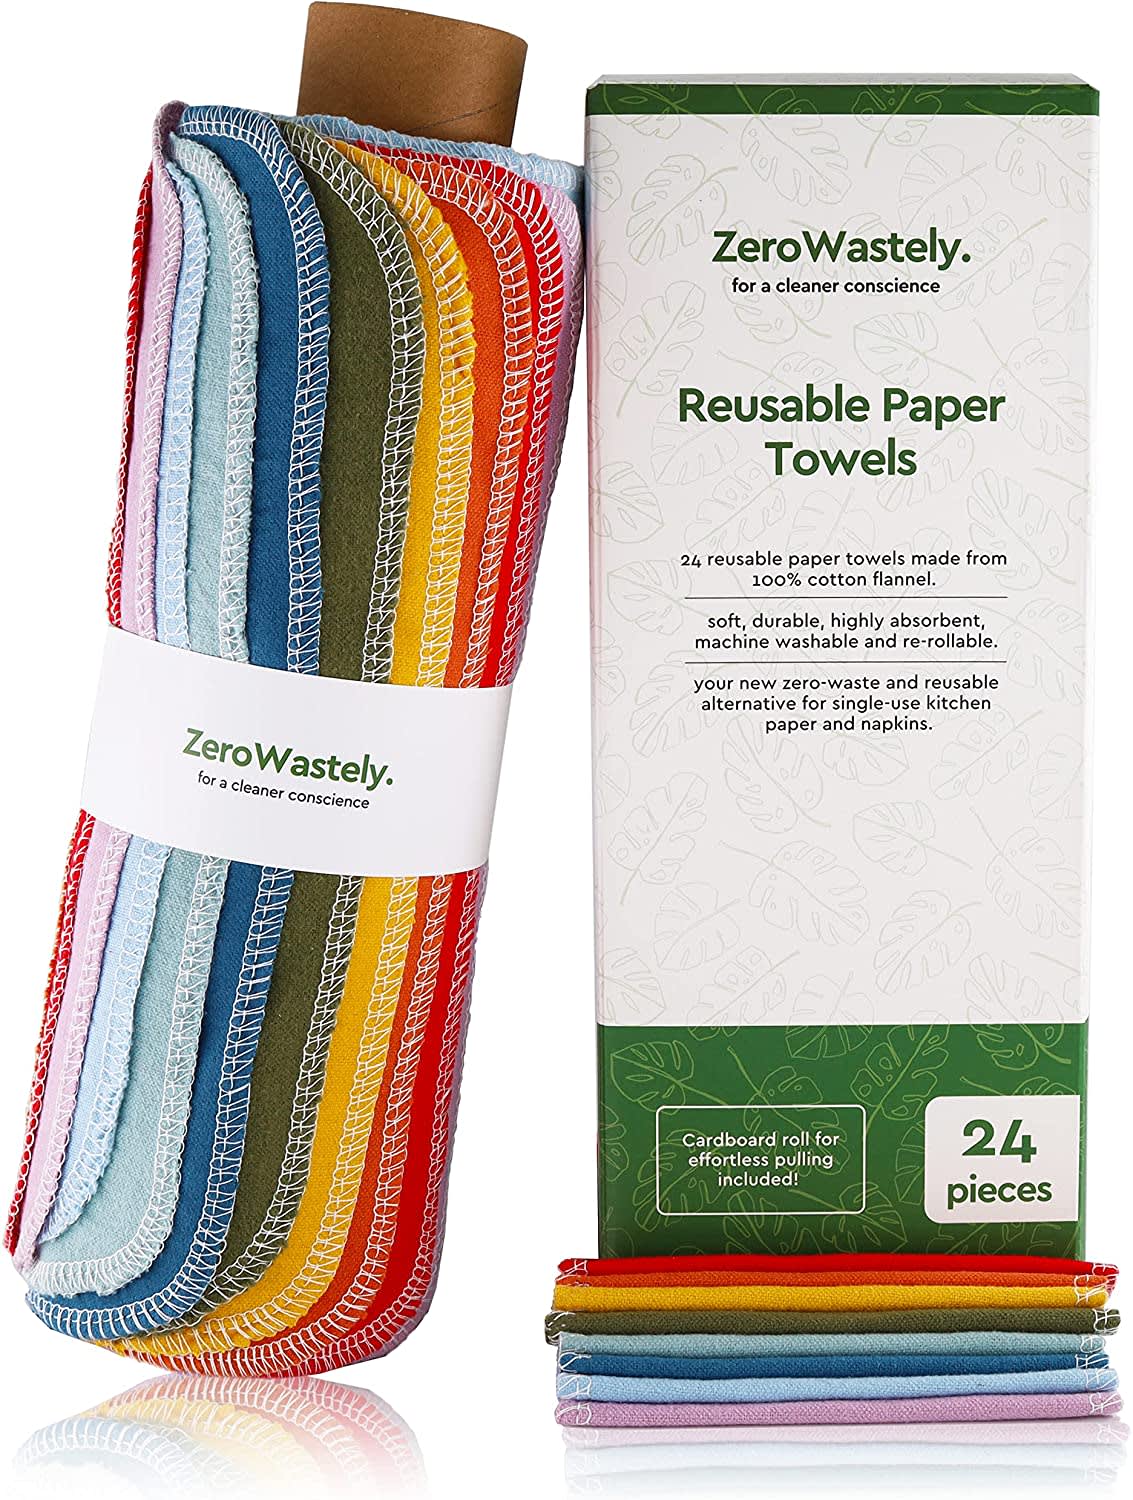 http://cdn.apartmenttherapy.info/image/upload/v1657835620/at/organize-clean/ZeroWastely_Reusable_Paper_Towels.jpg